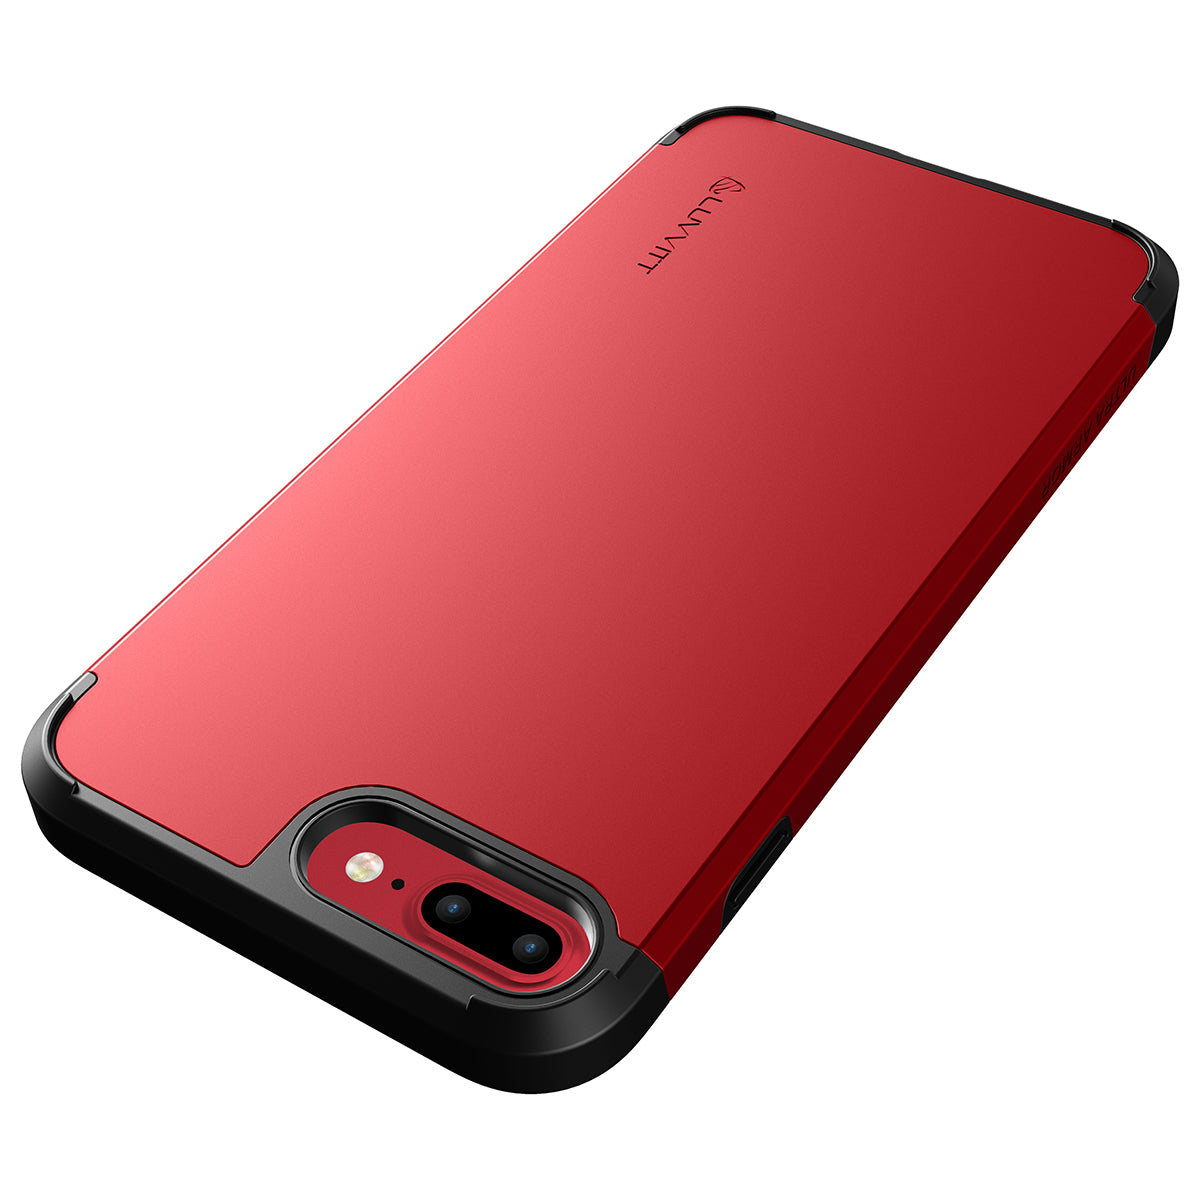 Luvvitt Ultra Armor Dual Layer Case for iPhone 7 Plus and 8 Plus - Red